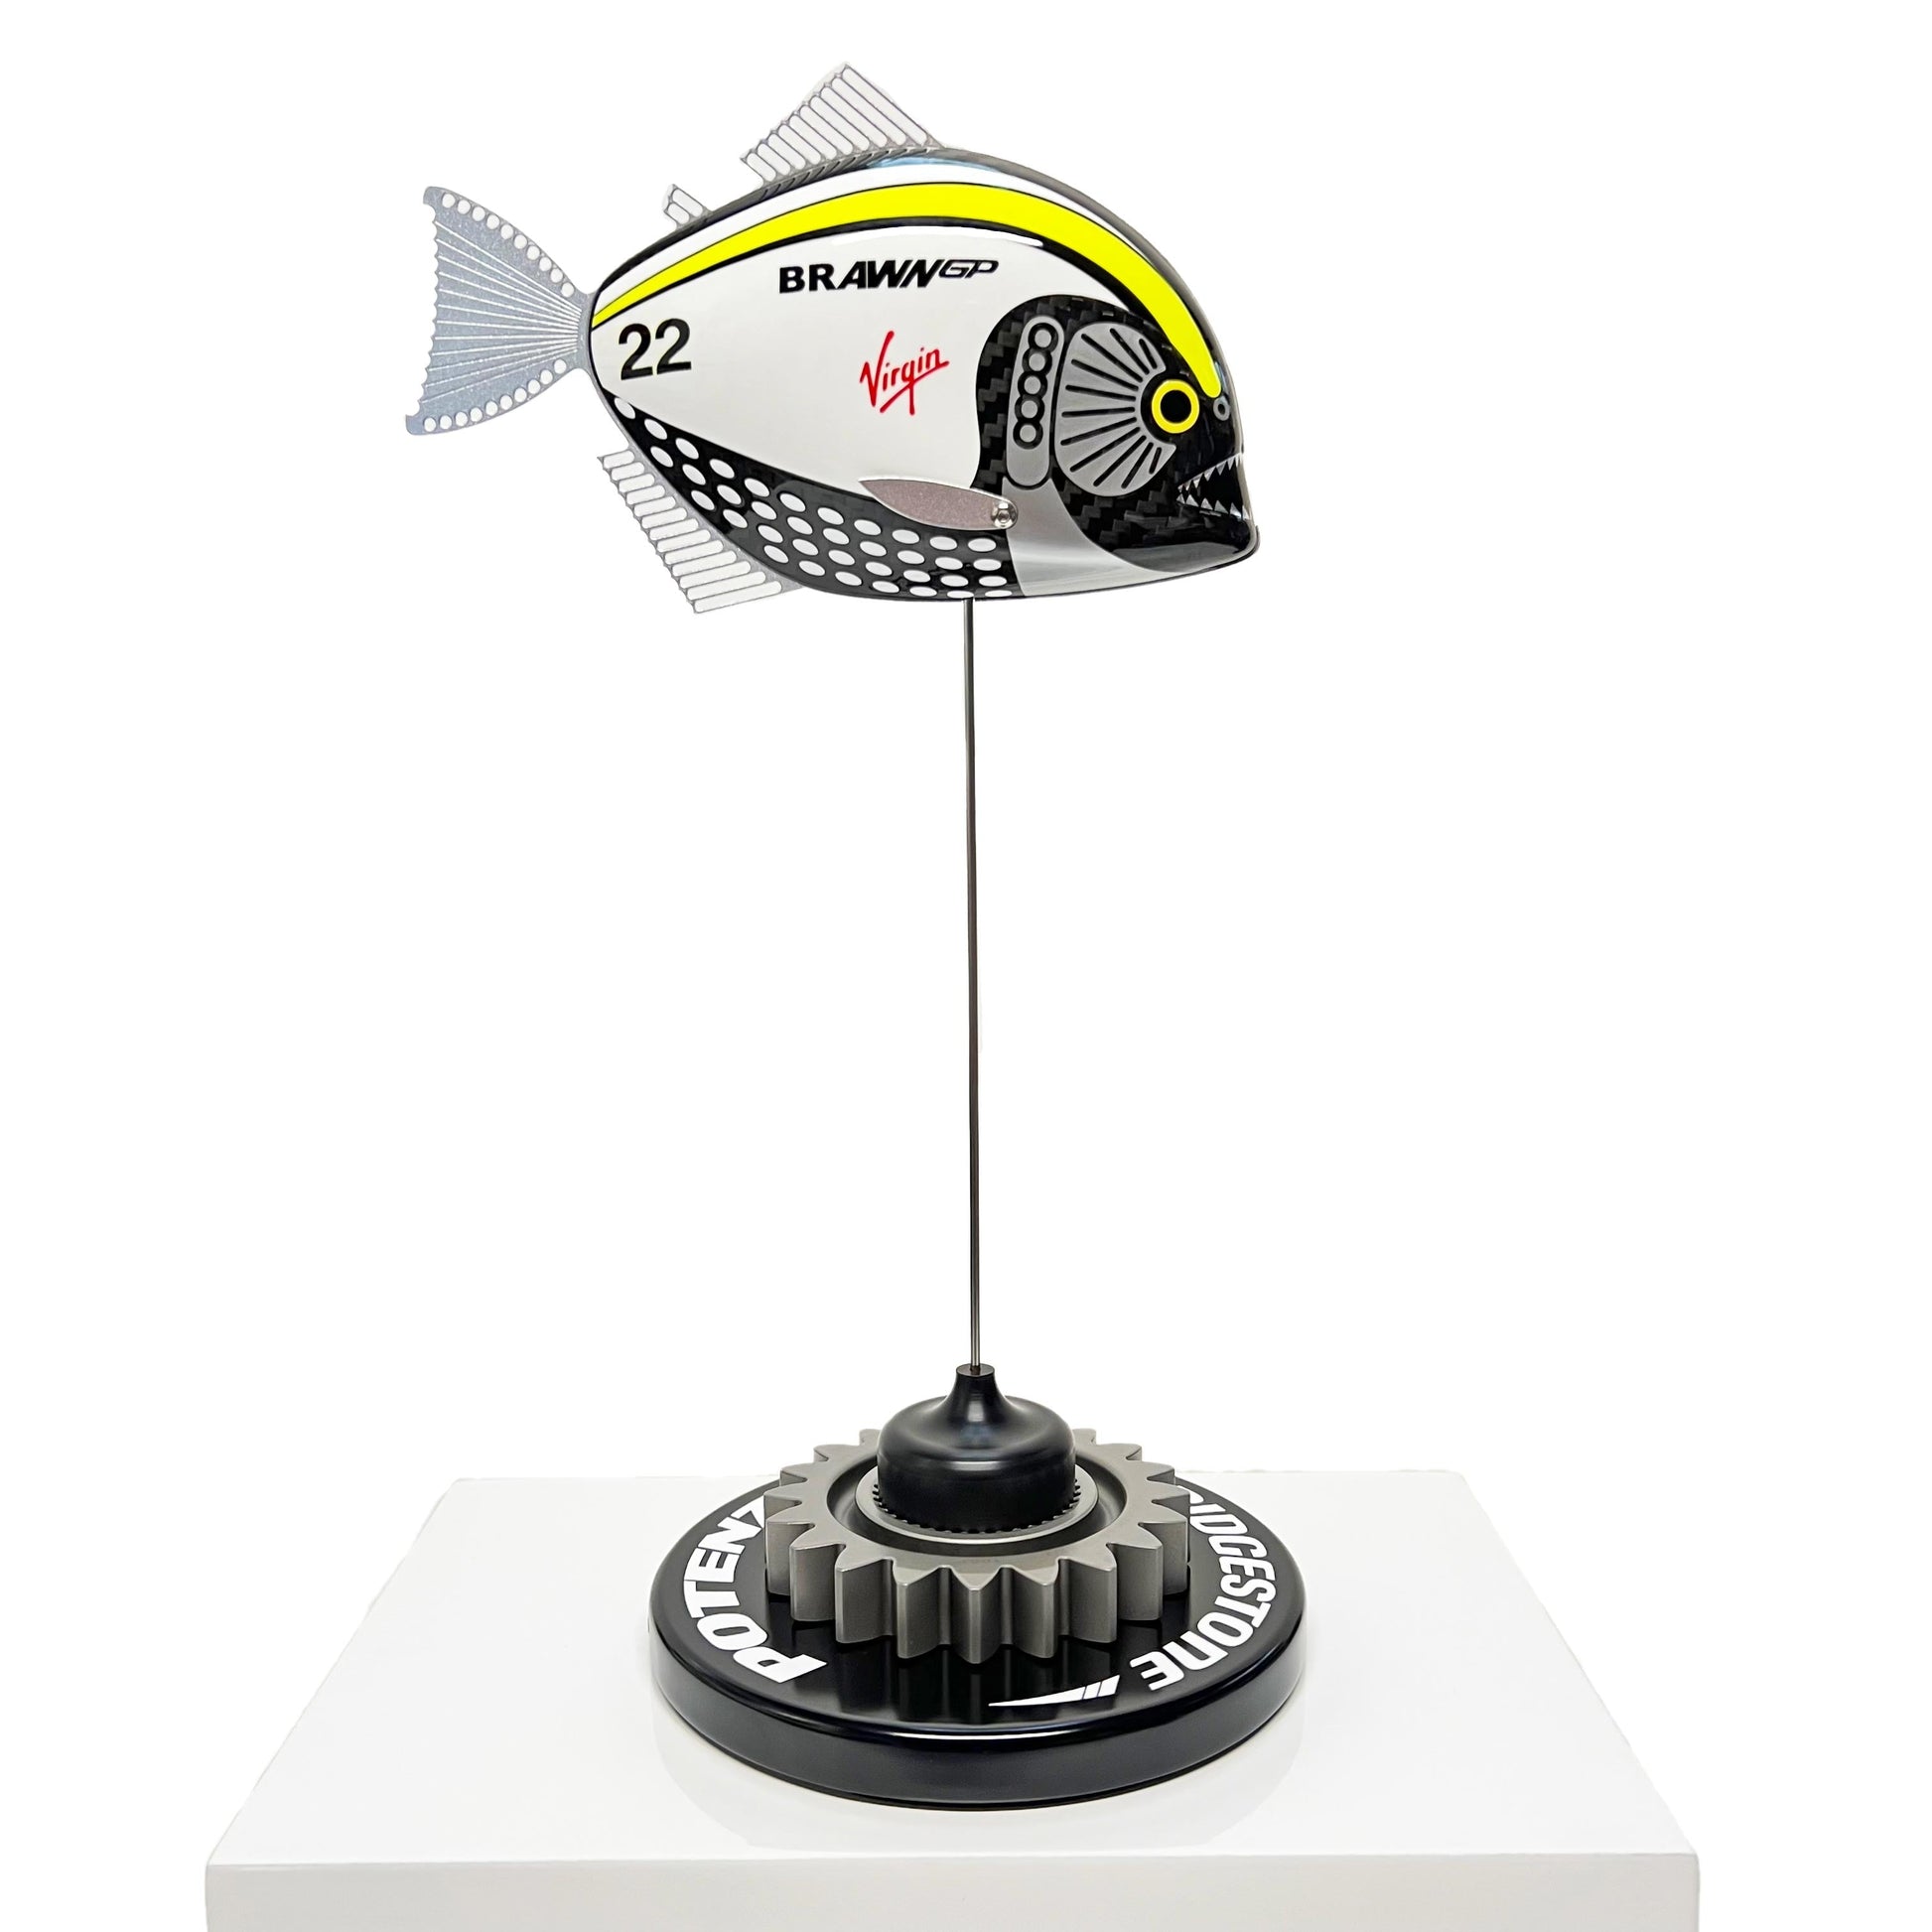 Carbon fibre piranha sculpture with Brawn GP livery on a black base with F1 gear